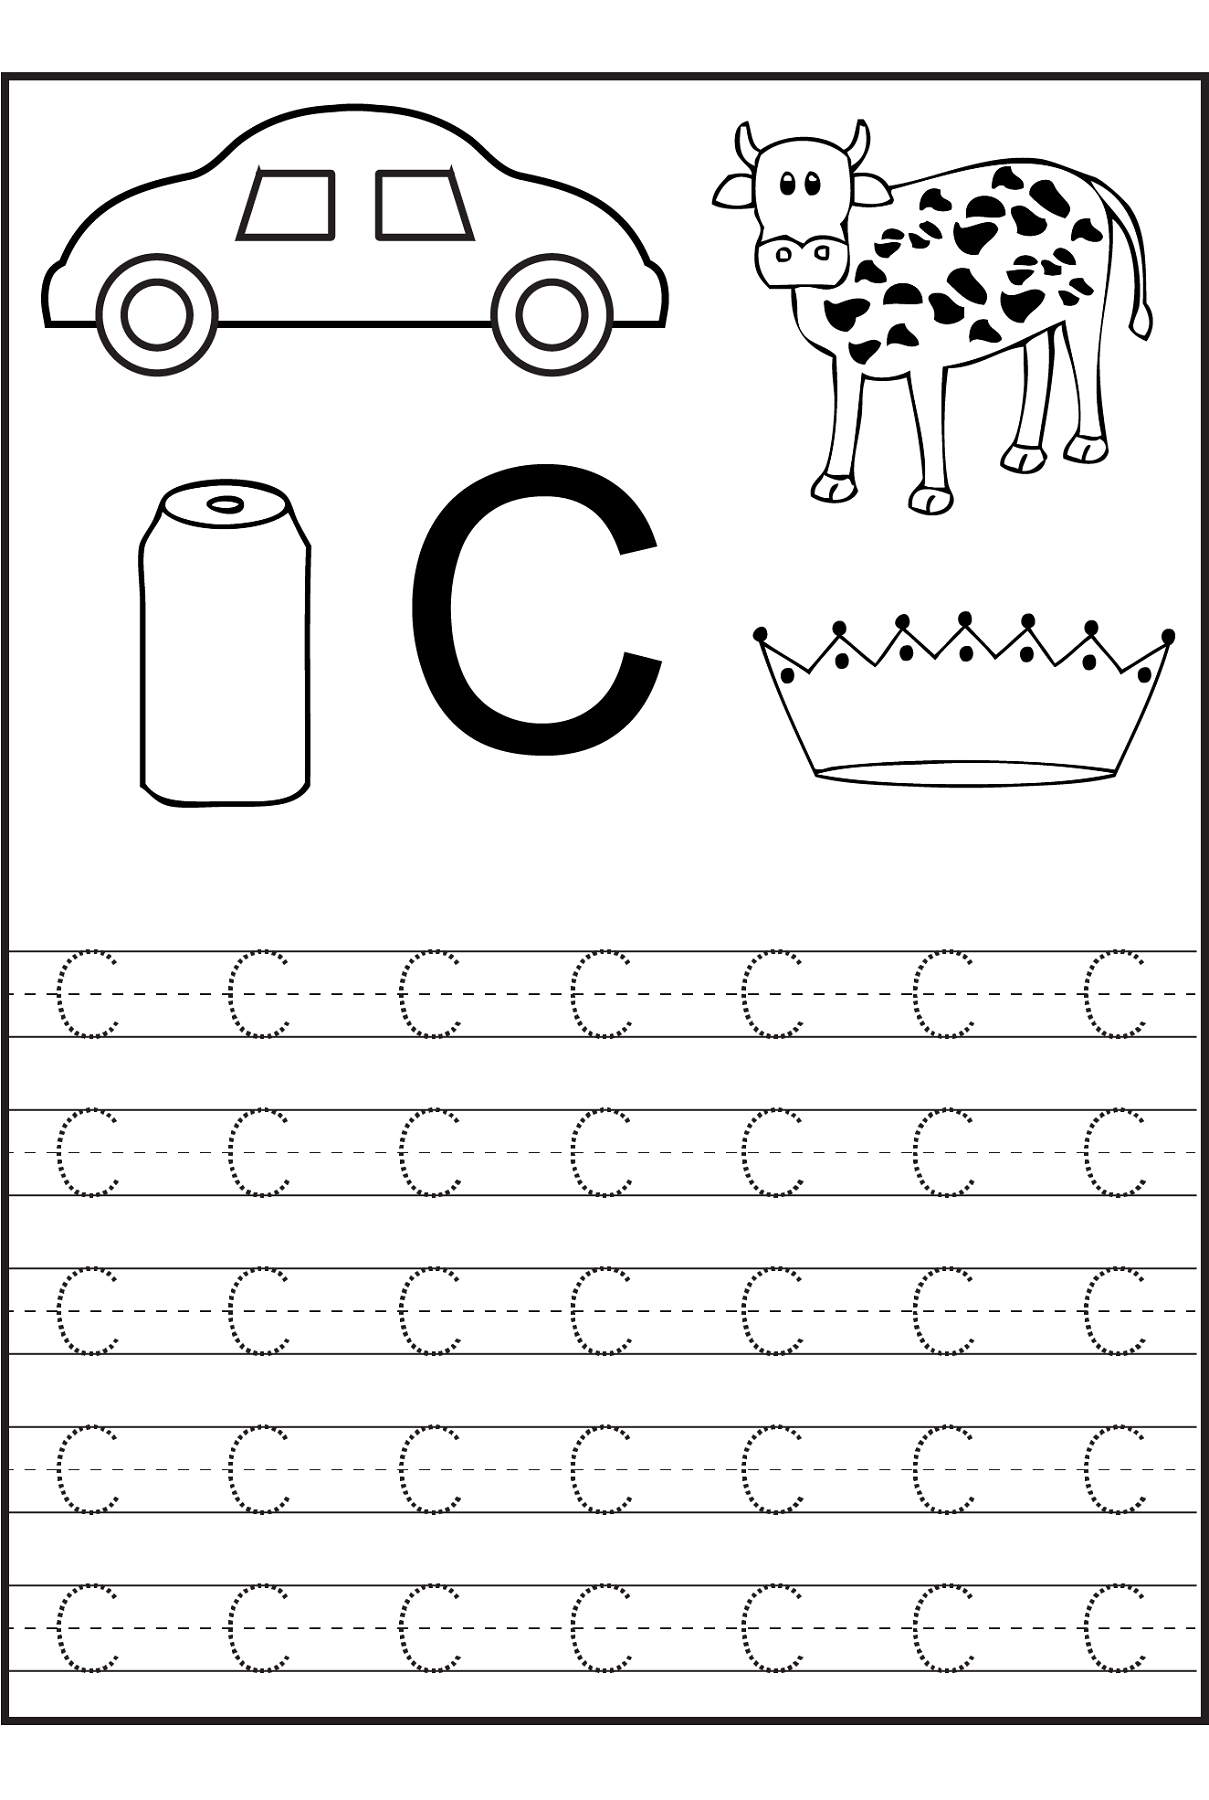 Trace The Letter C Worksheets | Preschool Worksheets inside Letter C Worksheets For First Grade